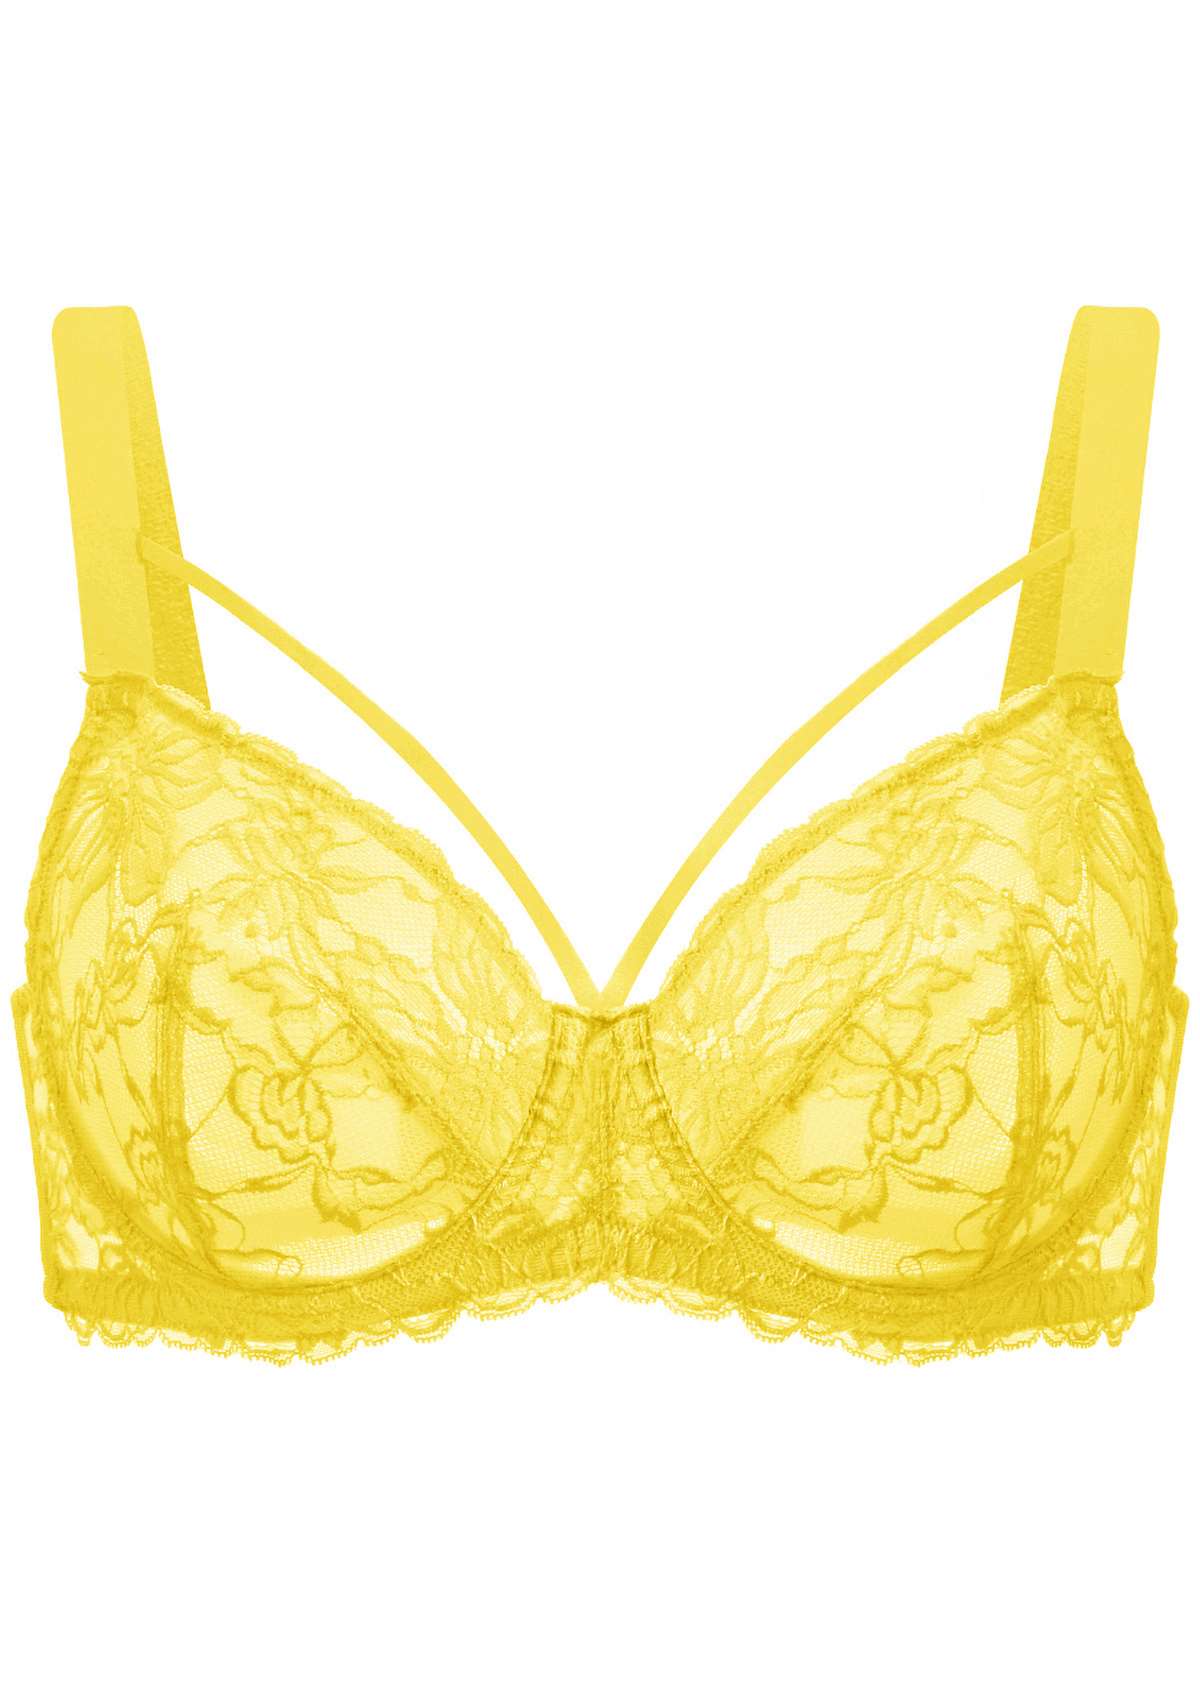 HSIA Unlined Lace Mesh Minimizer Bra For Large Breasts, Full Coverage - Bright Green / 46 / DDD/F